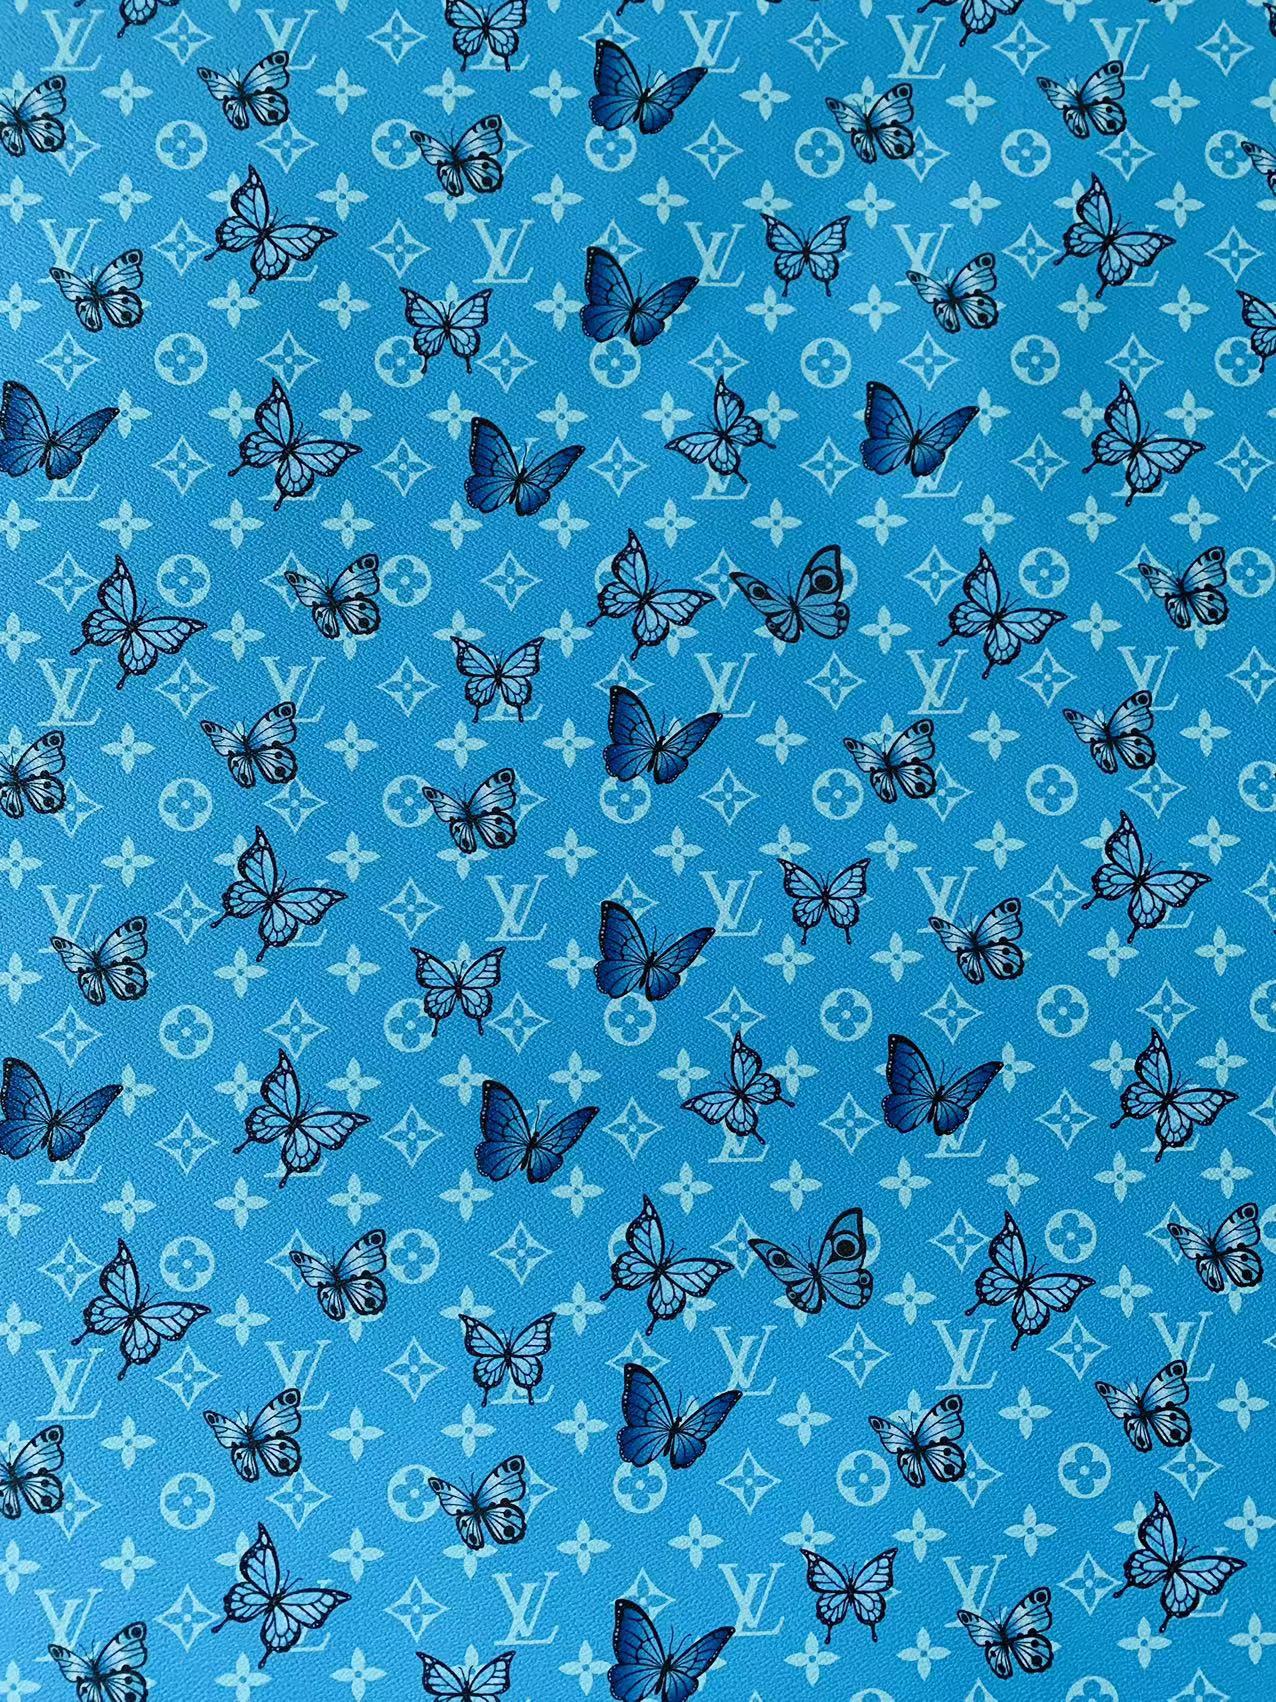 Louis Vuitton leather fabric for sale, LV leather material for sale